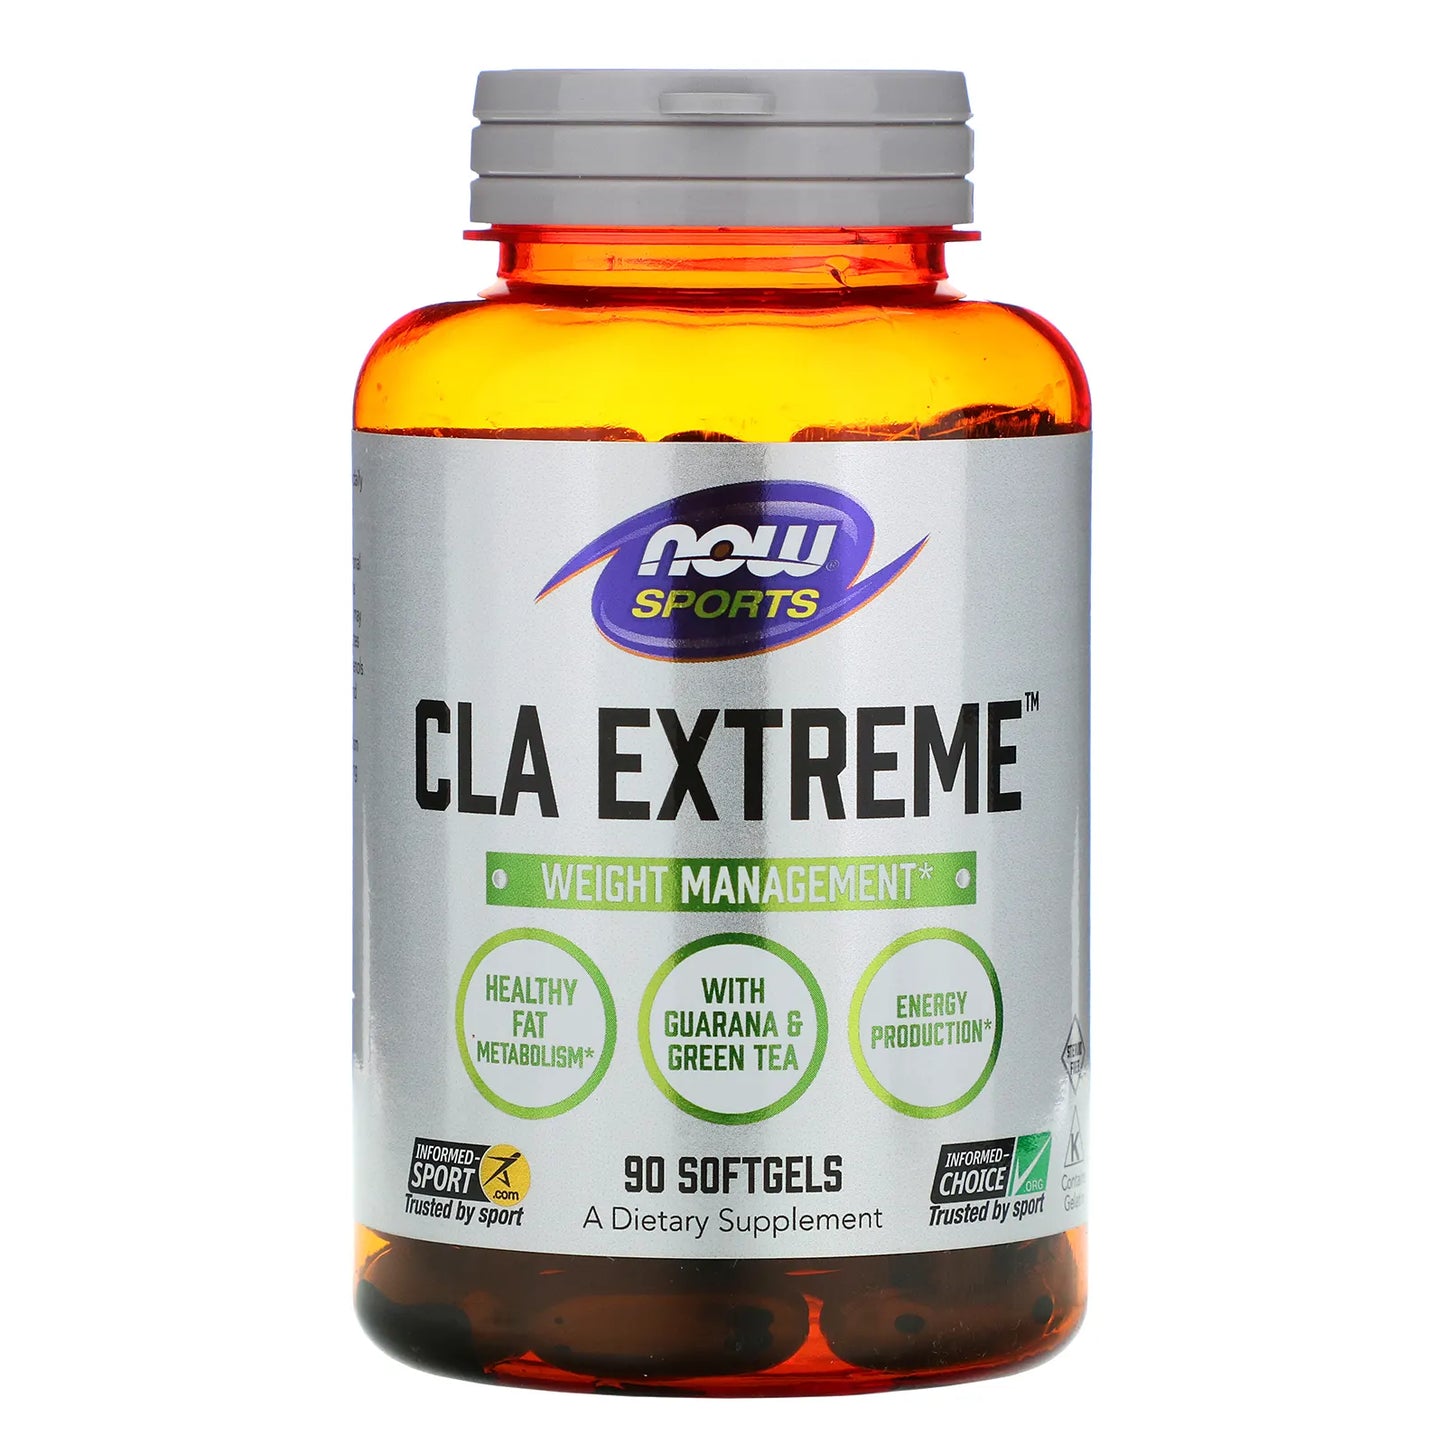 NOW SPORTS CLA EXTREME, 90 SOFTGELS